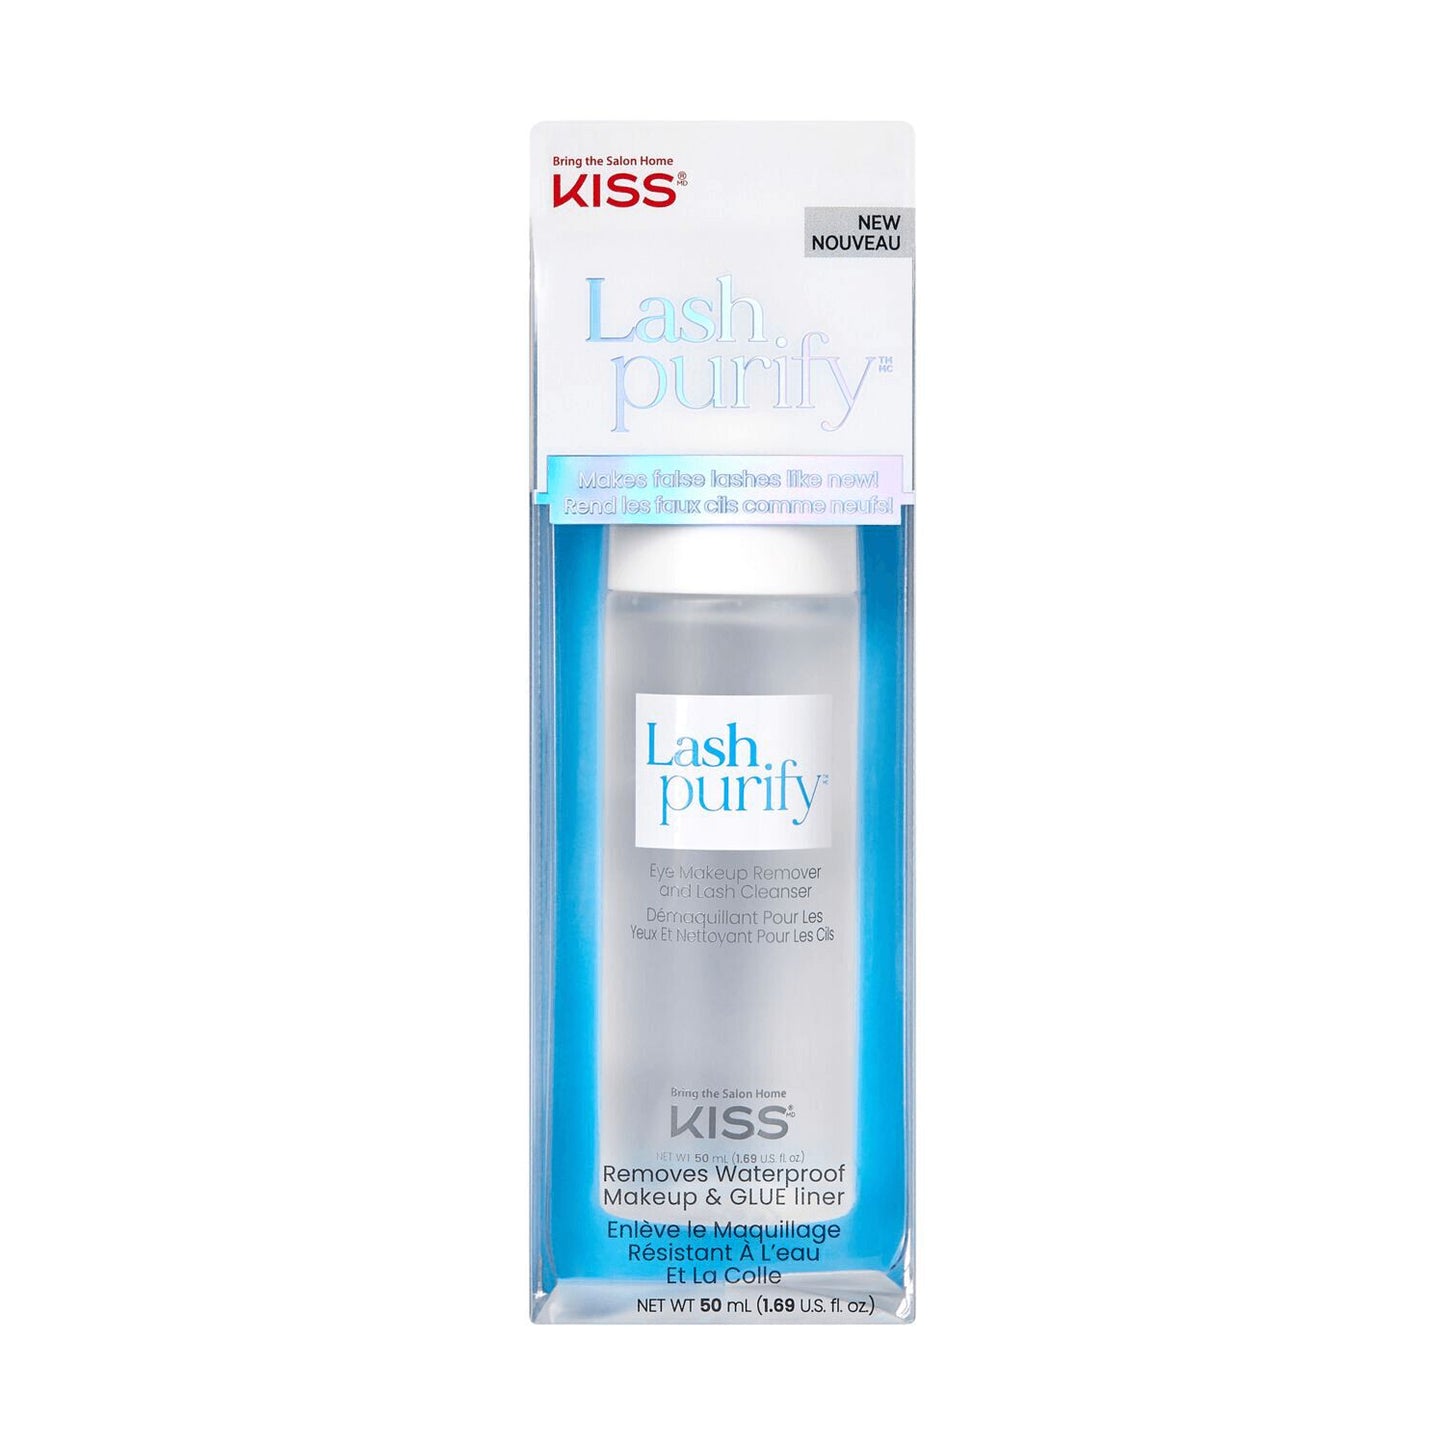 Lash Drip  by   KISS Lash Purify Eye Makeup Remover and Lash Cleanser